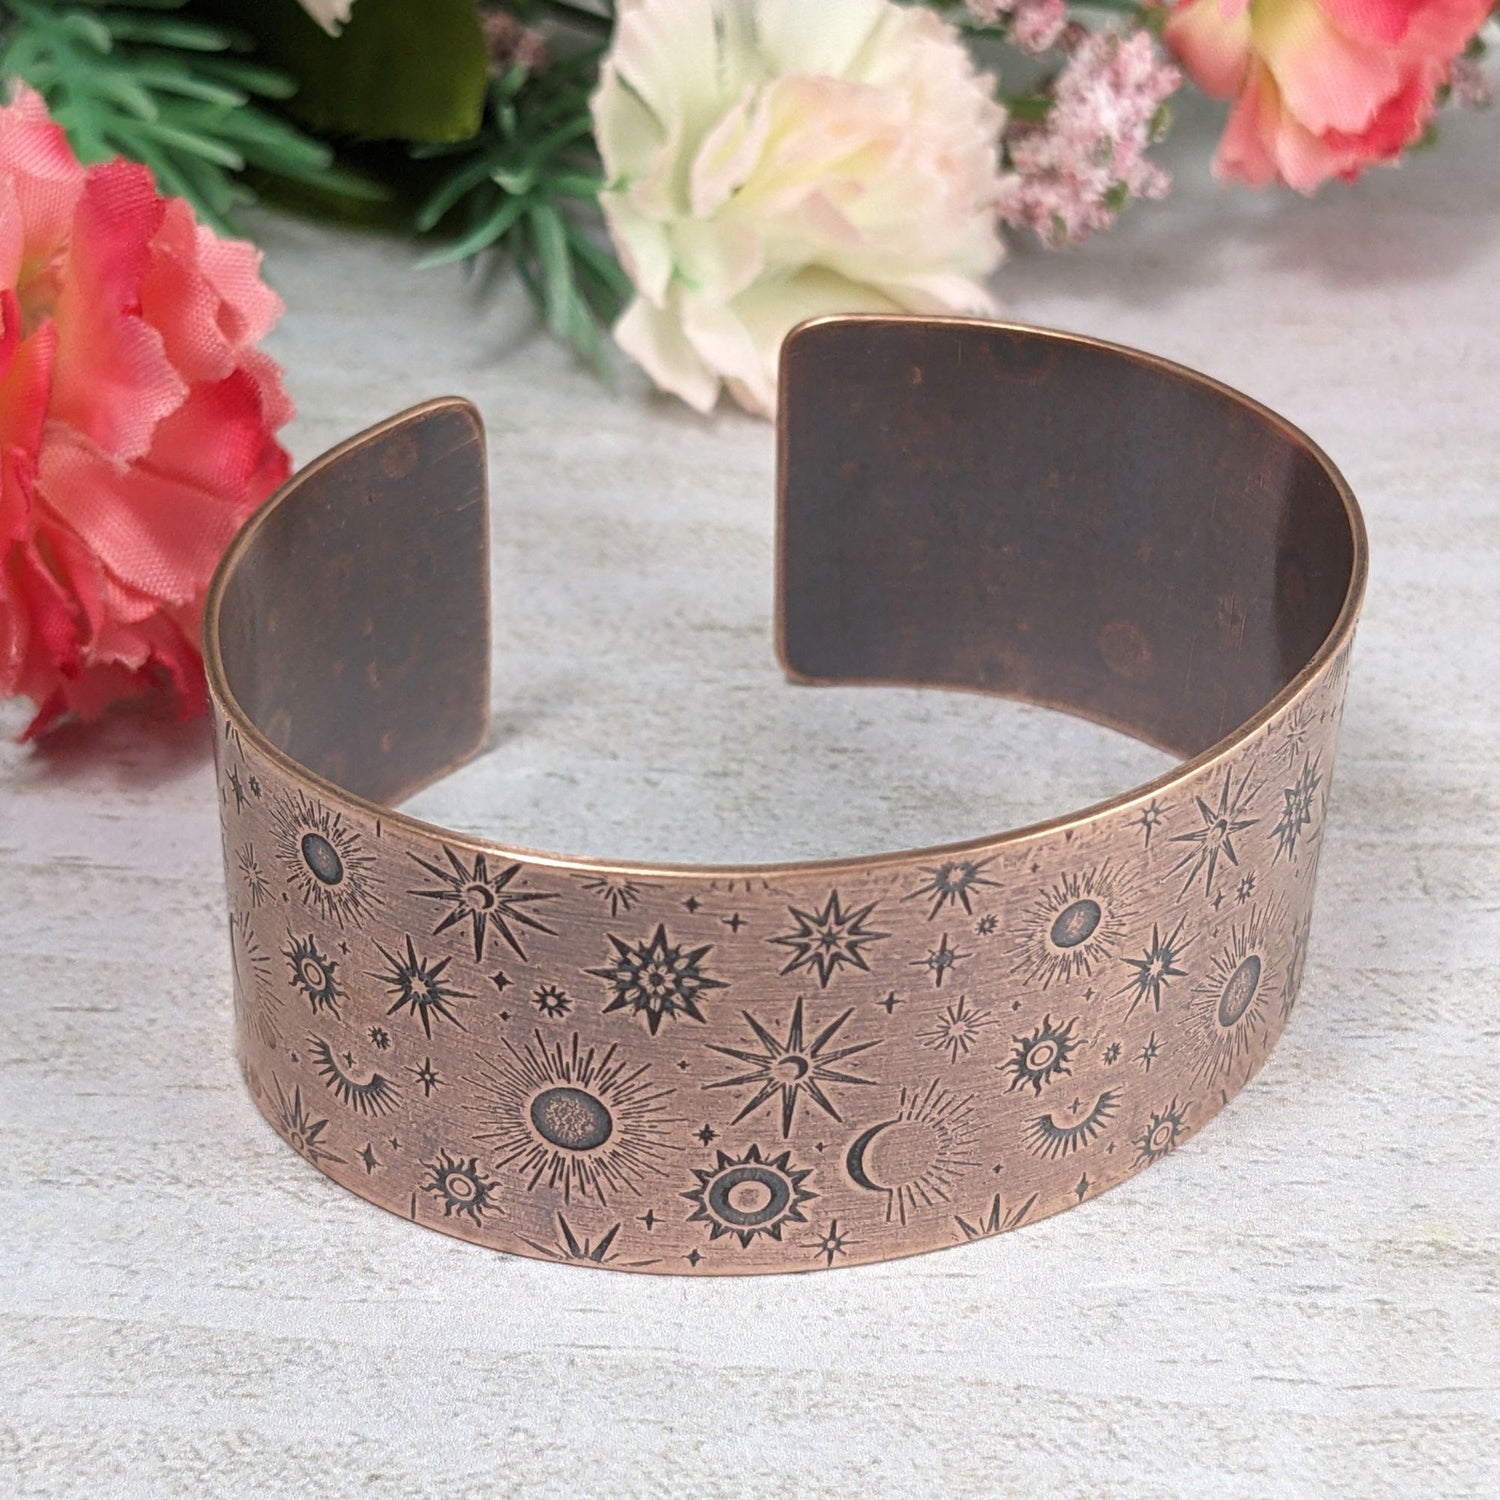 A one inch wide copper cuff bracelet covered in an impressed design of stars and planets.